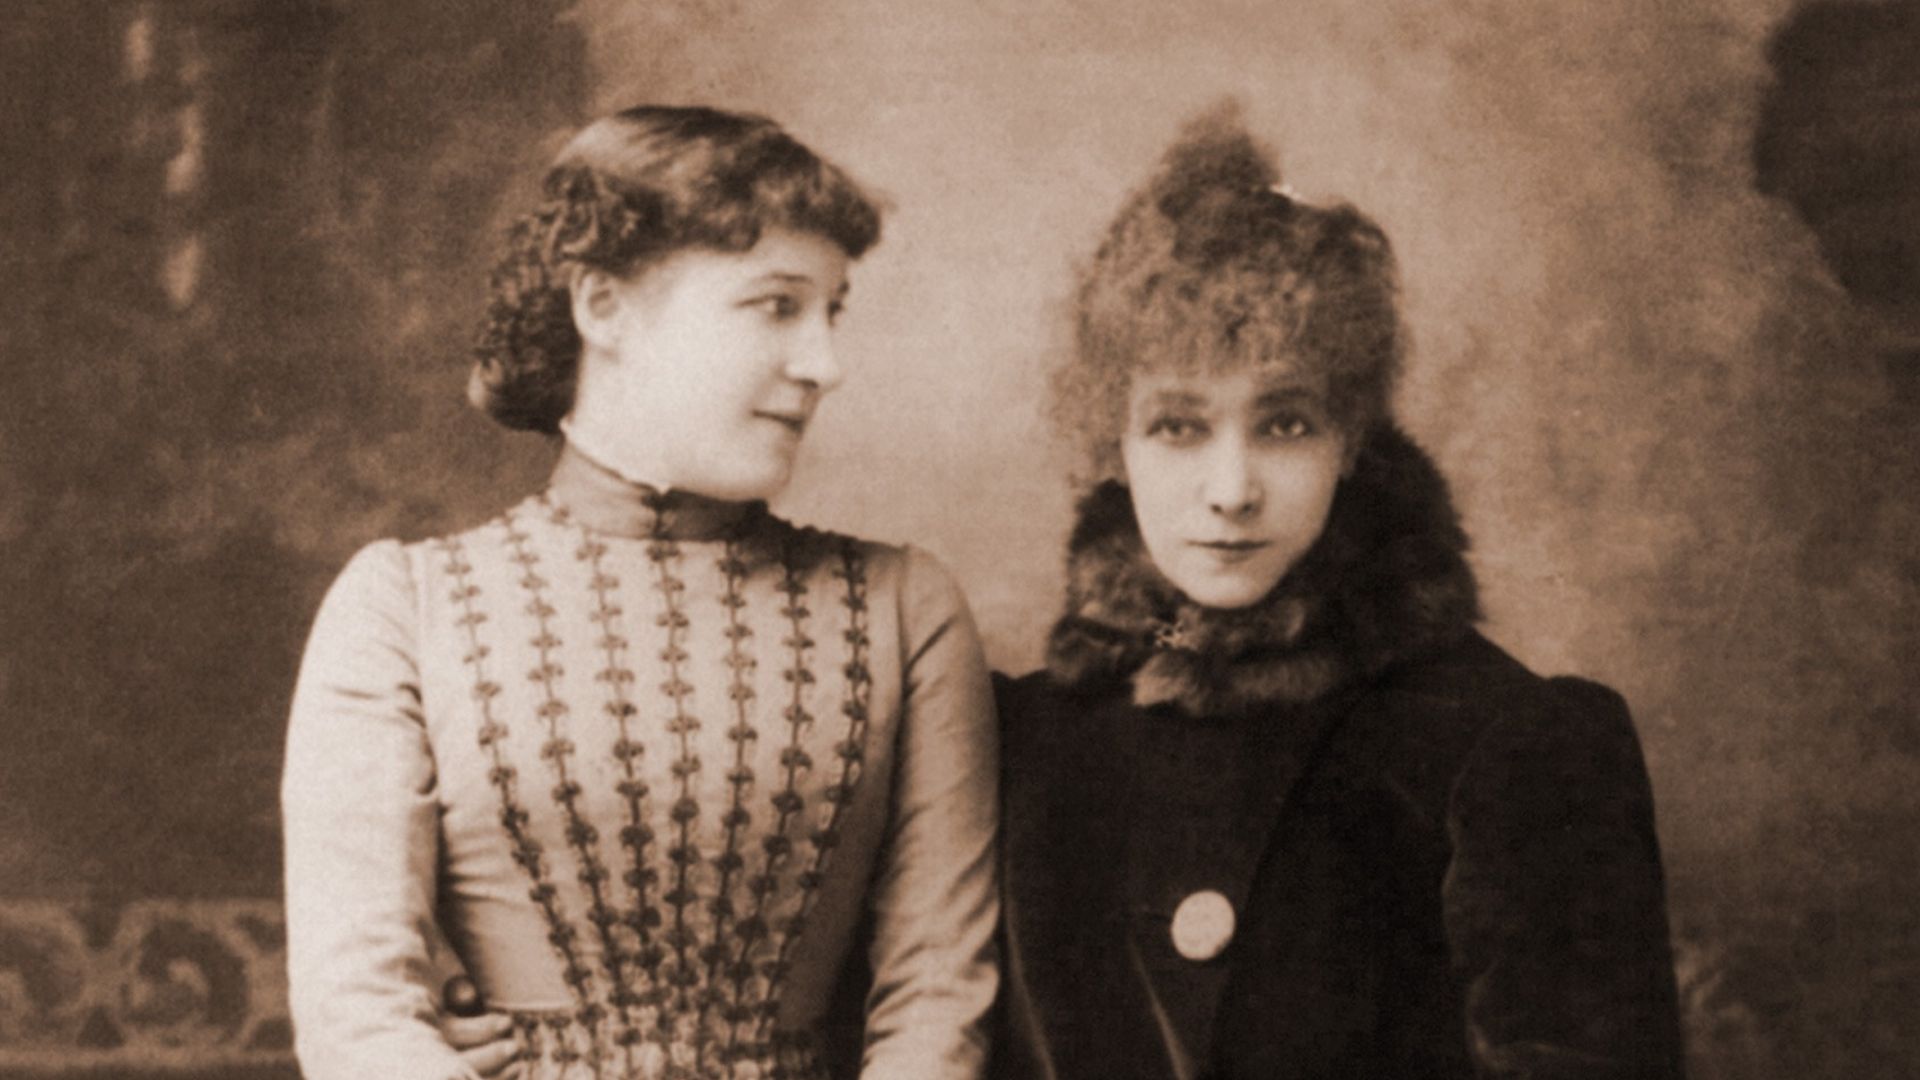 Sepia-tone picture of two women from the 1900's